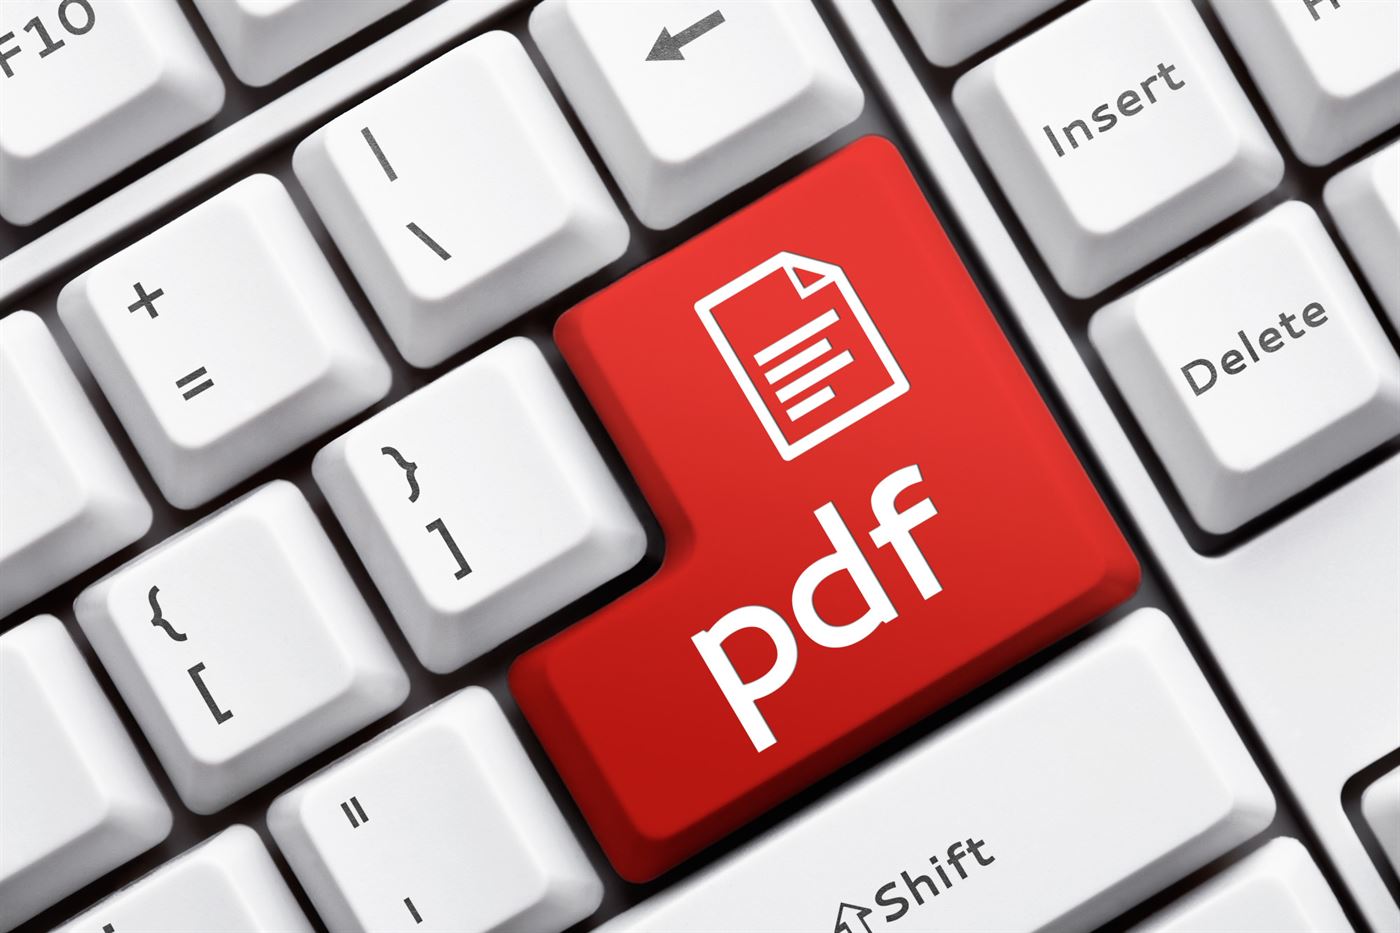 what does PDF mean in computer terms